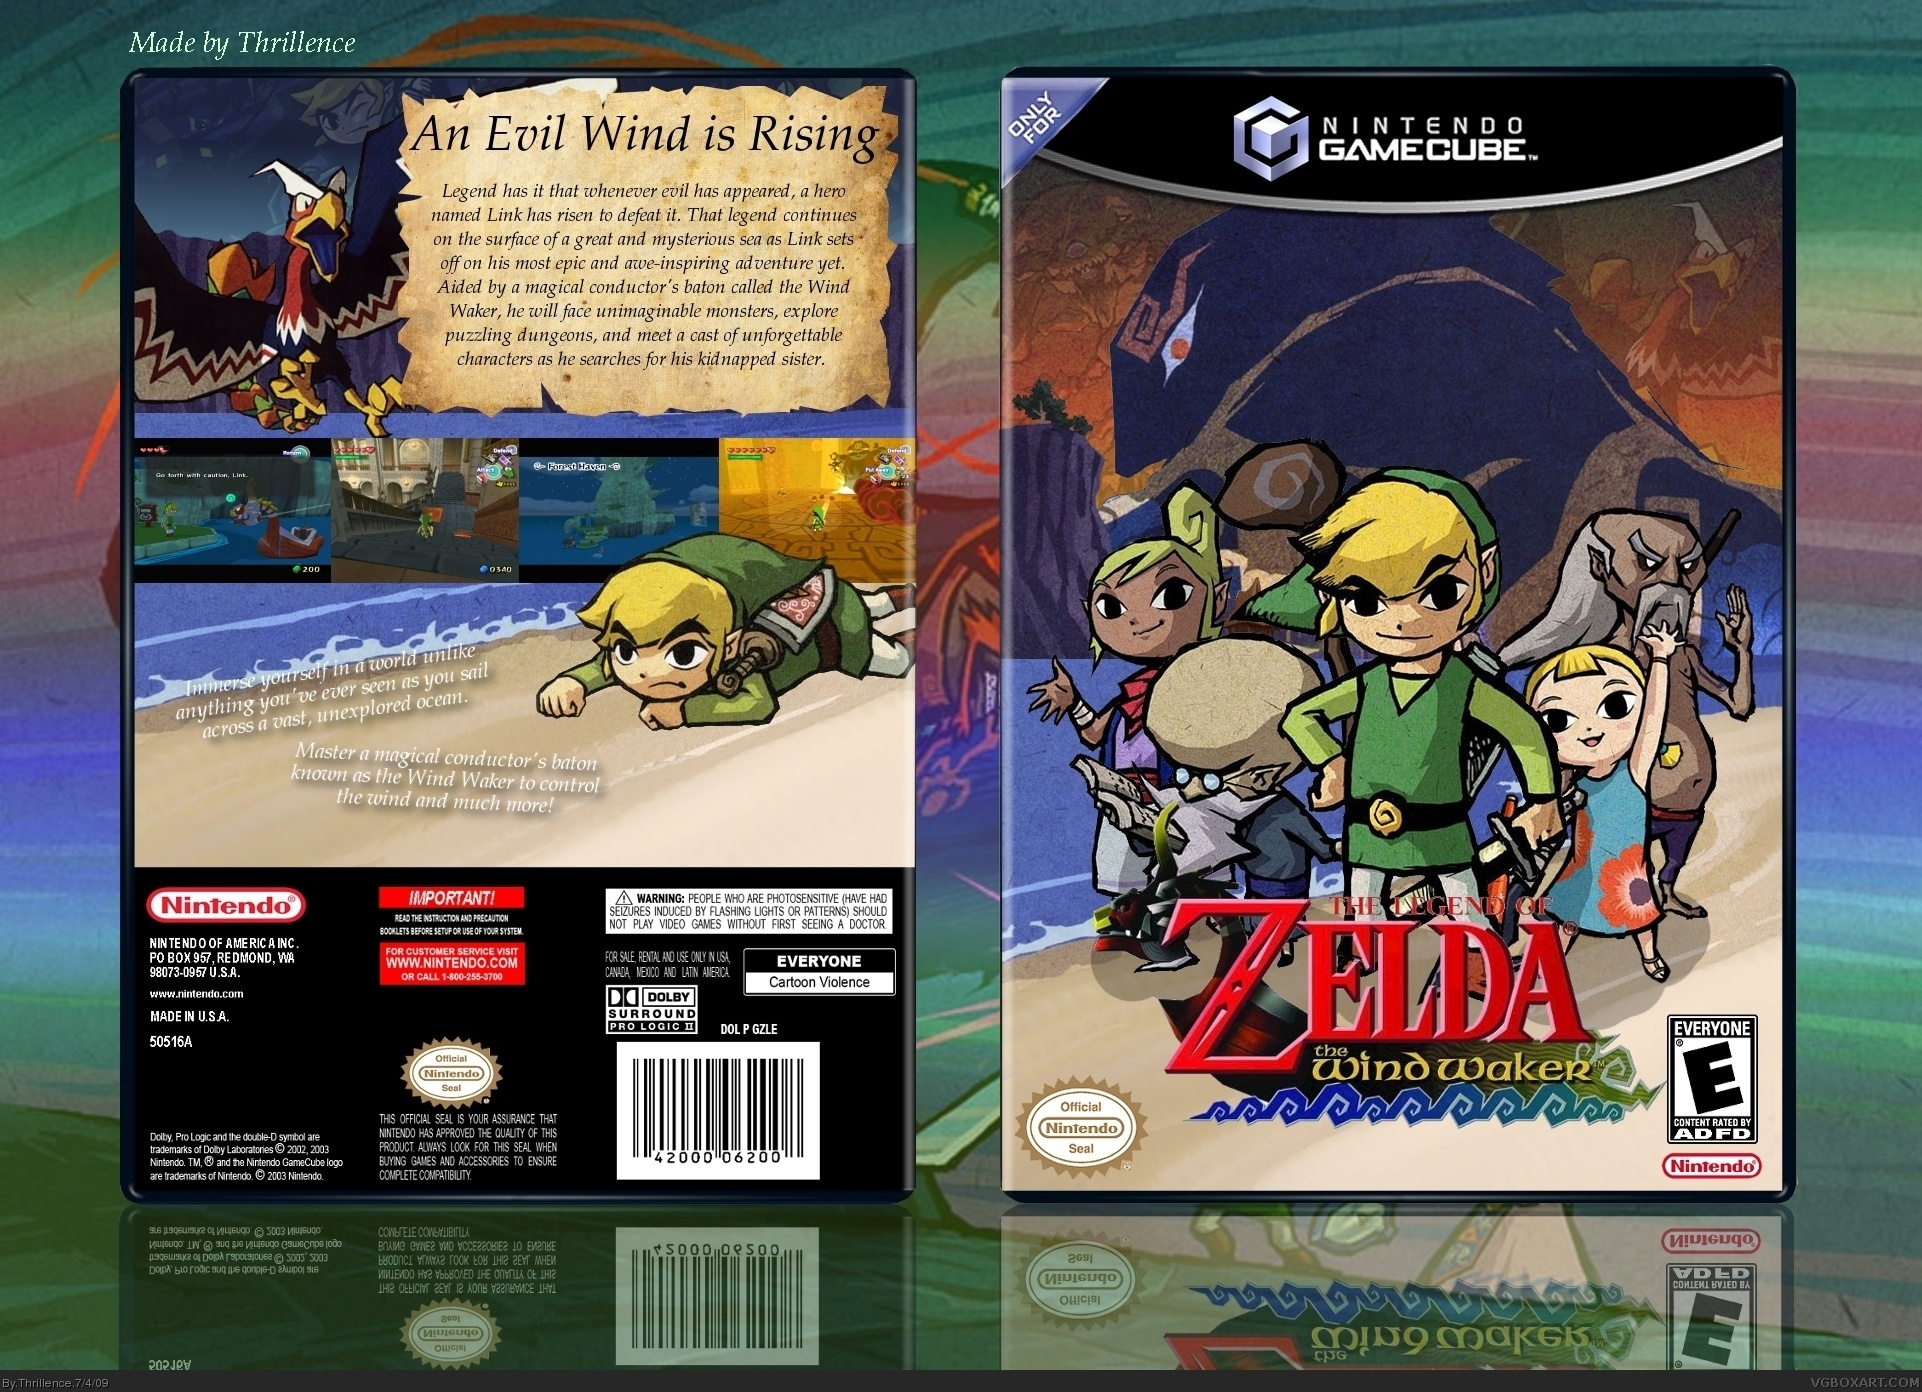 The Legend of Zelda: The Wind Waker GameCube Box Art Cover by Thrillence